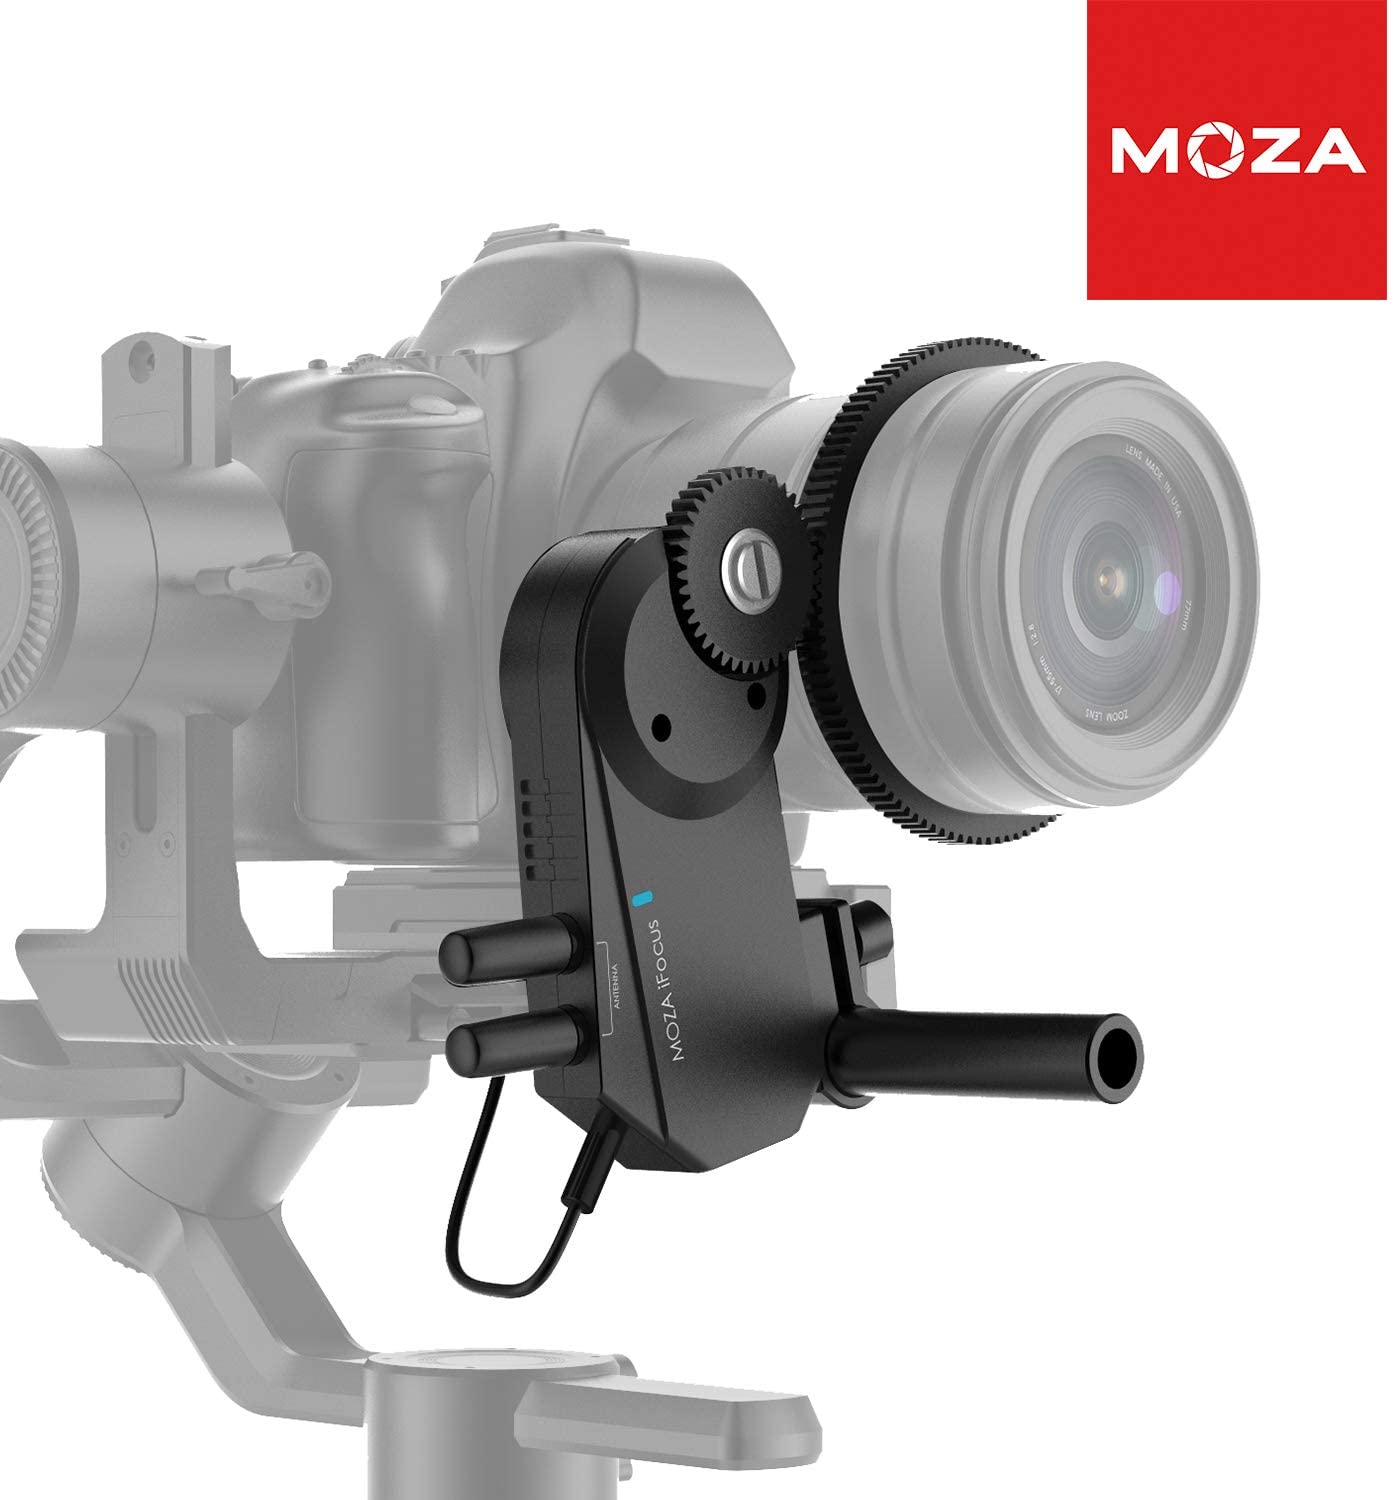 Moza iFocus Wireless Lens Follow Focus System (Motor and Hand Unit) for Moza Air 2, Air, or AirCross gimbal